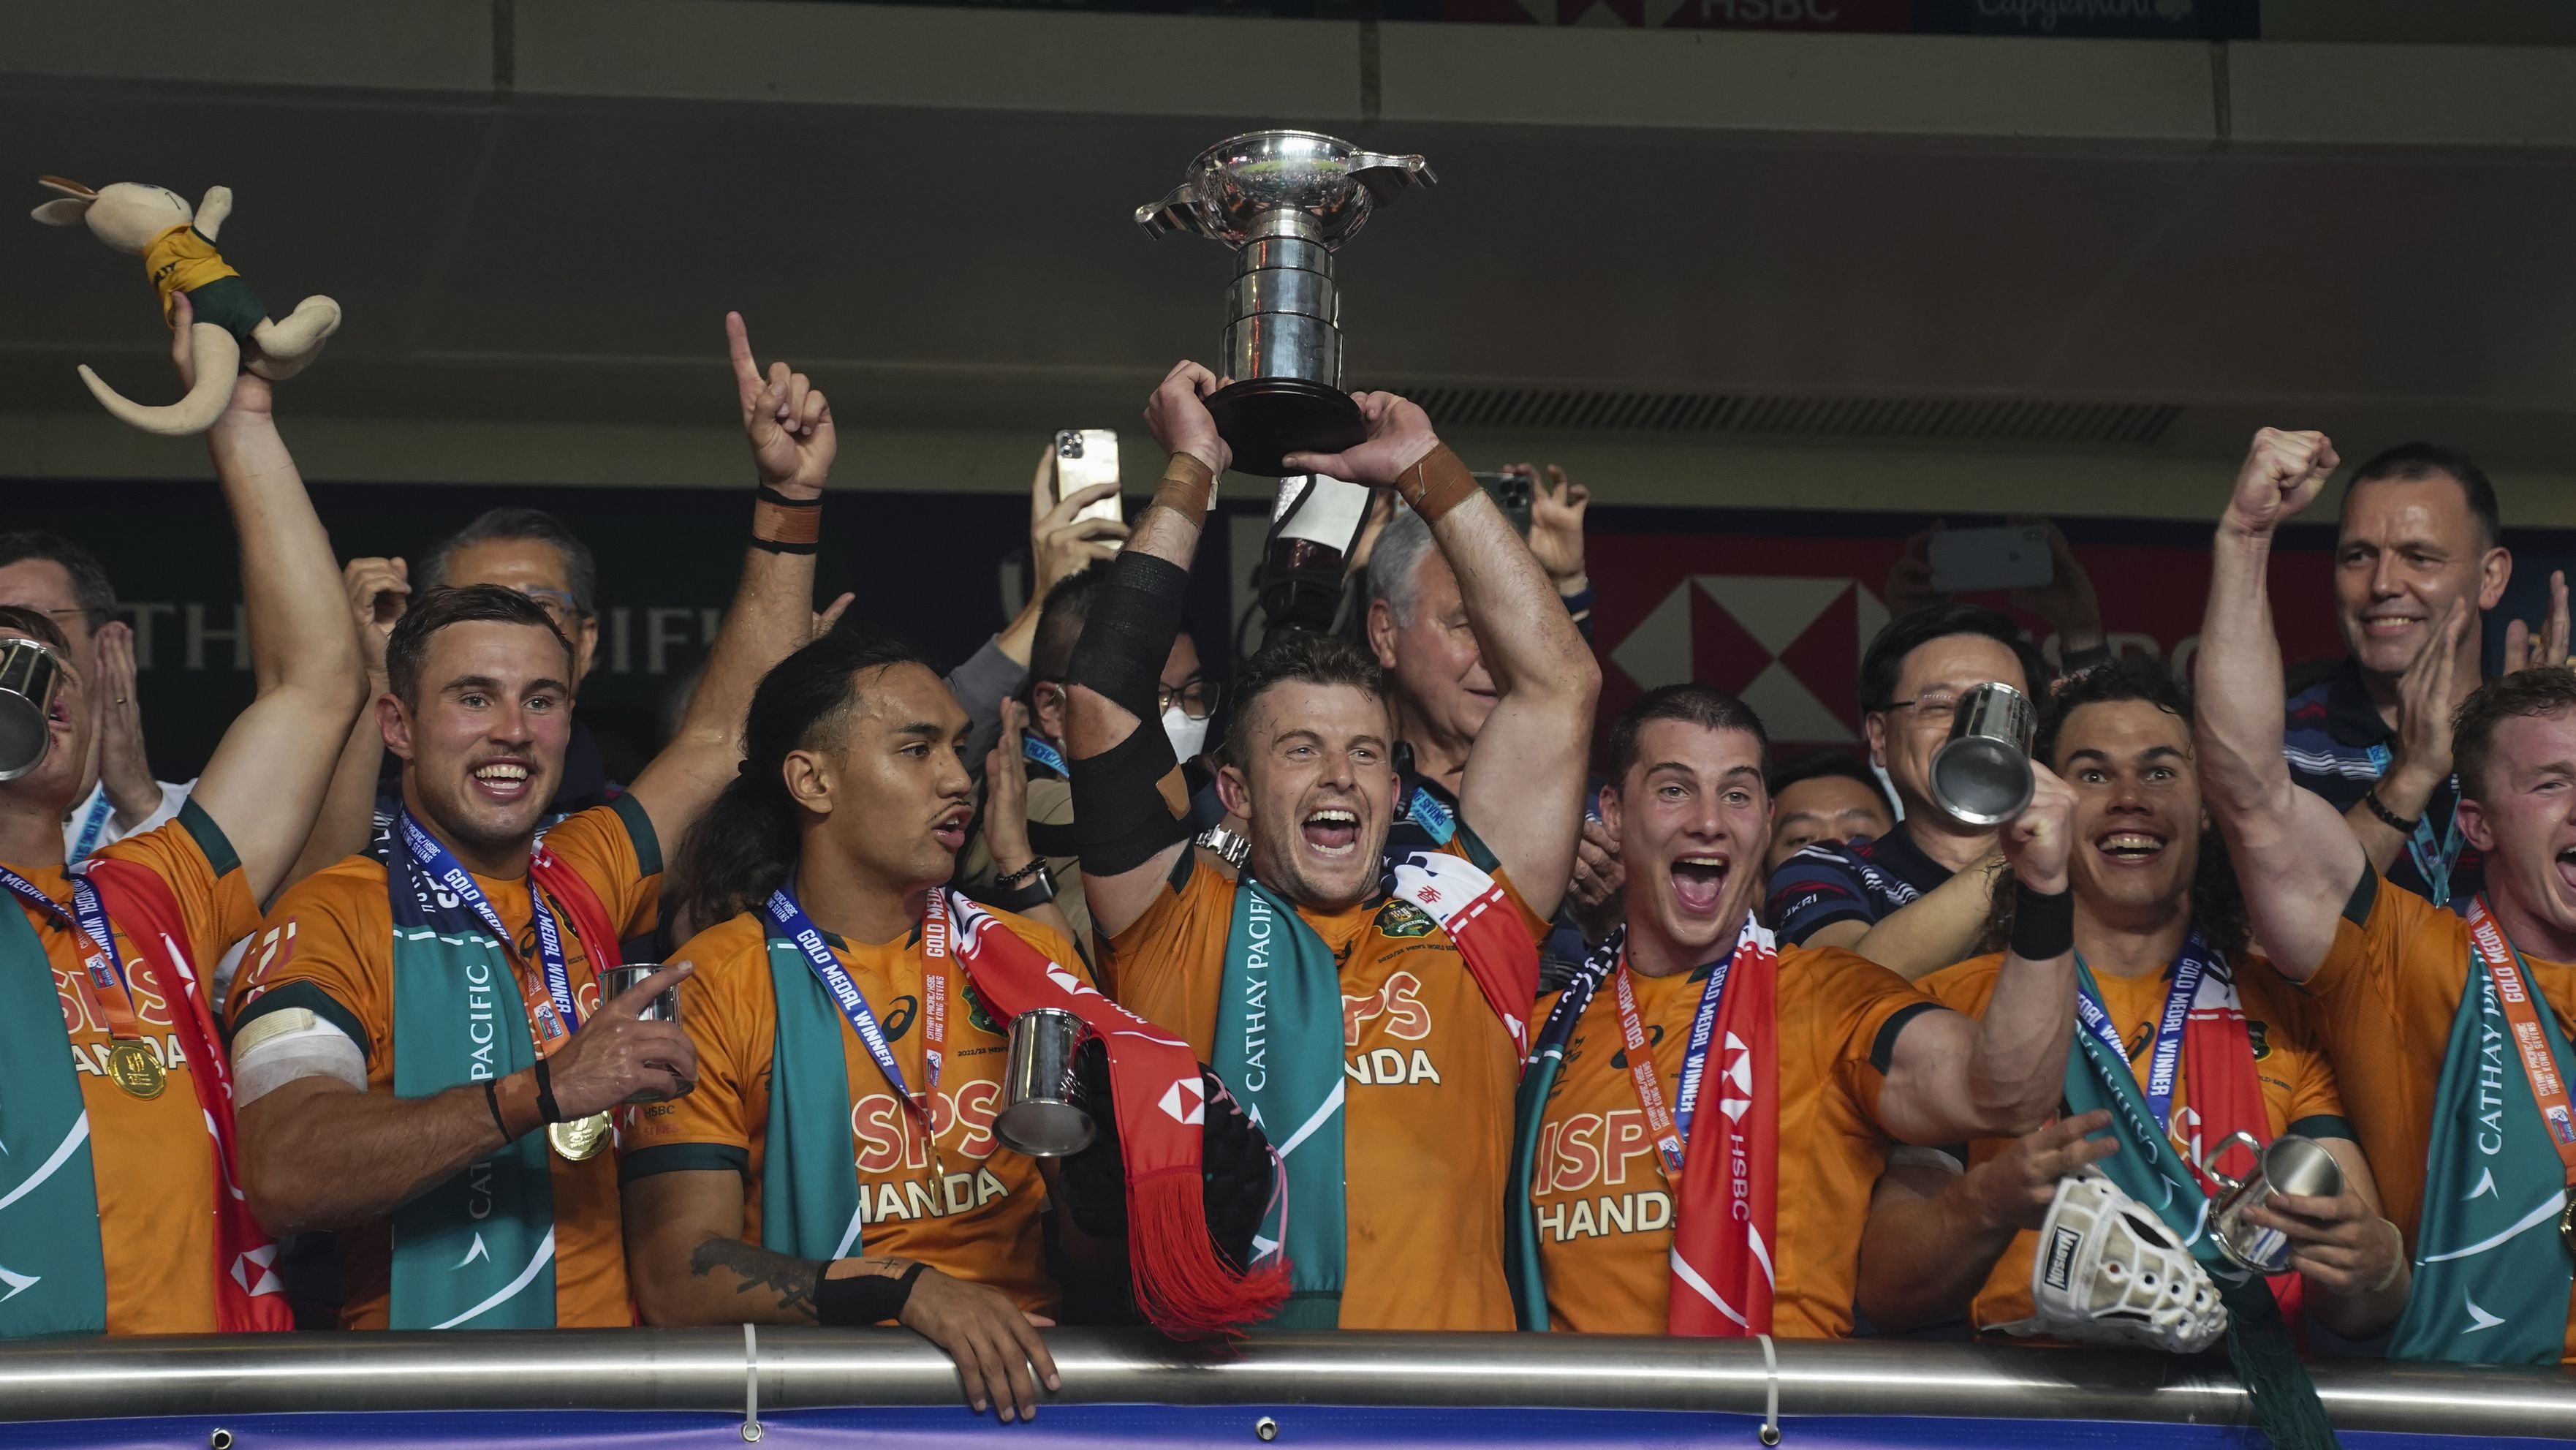 Australia players celebrate with their trophy after winning in the Hong Kong Sevens rugby tournament in Hong Kong, Sunday Nov. 6, 2022. (AP Photo/Anthony Kwan)